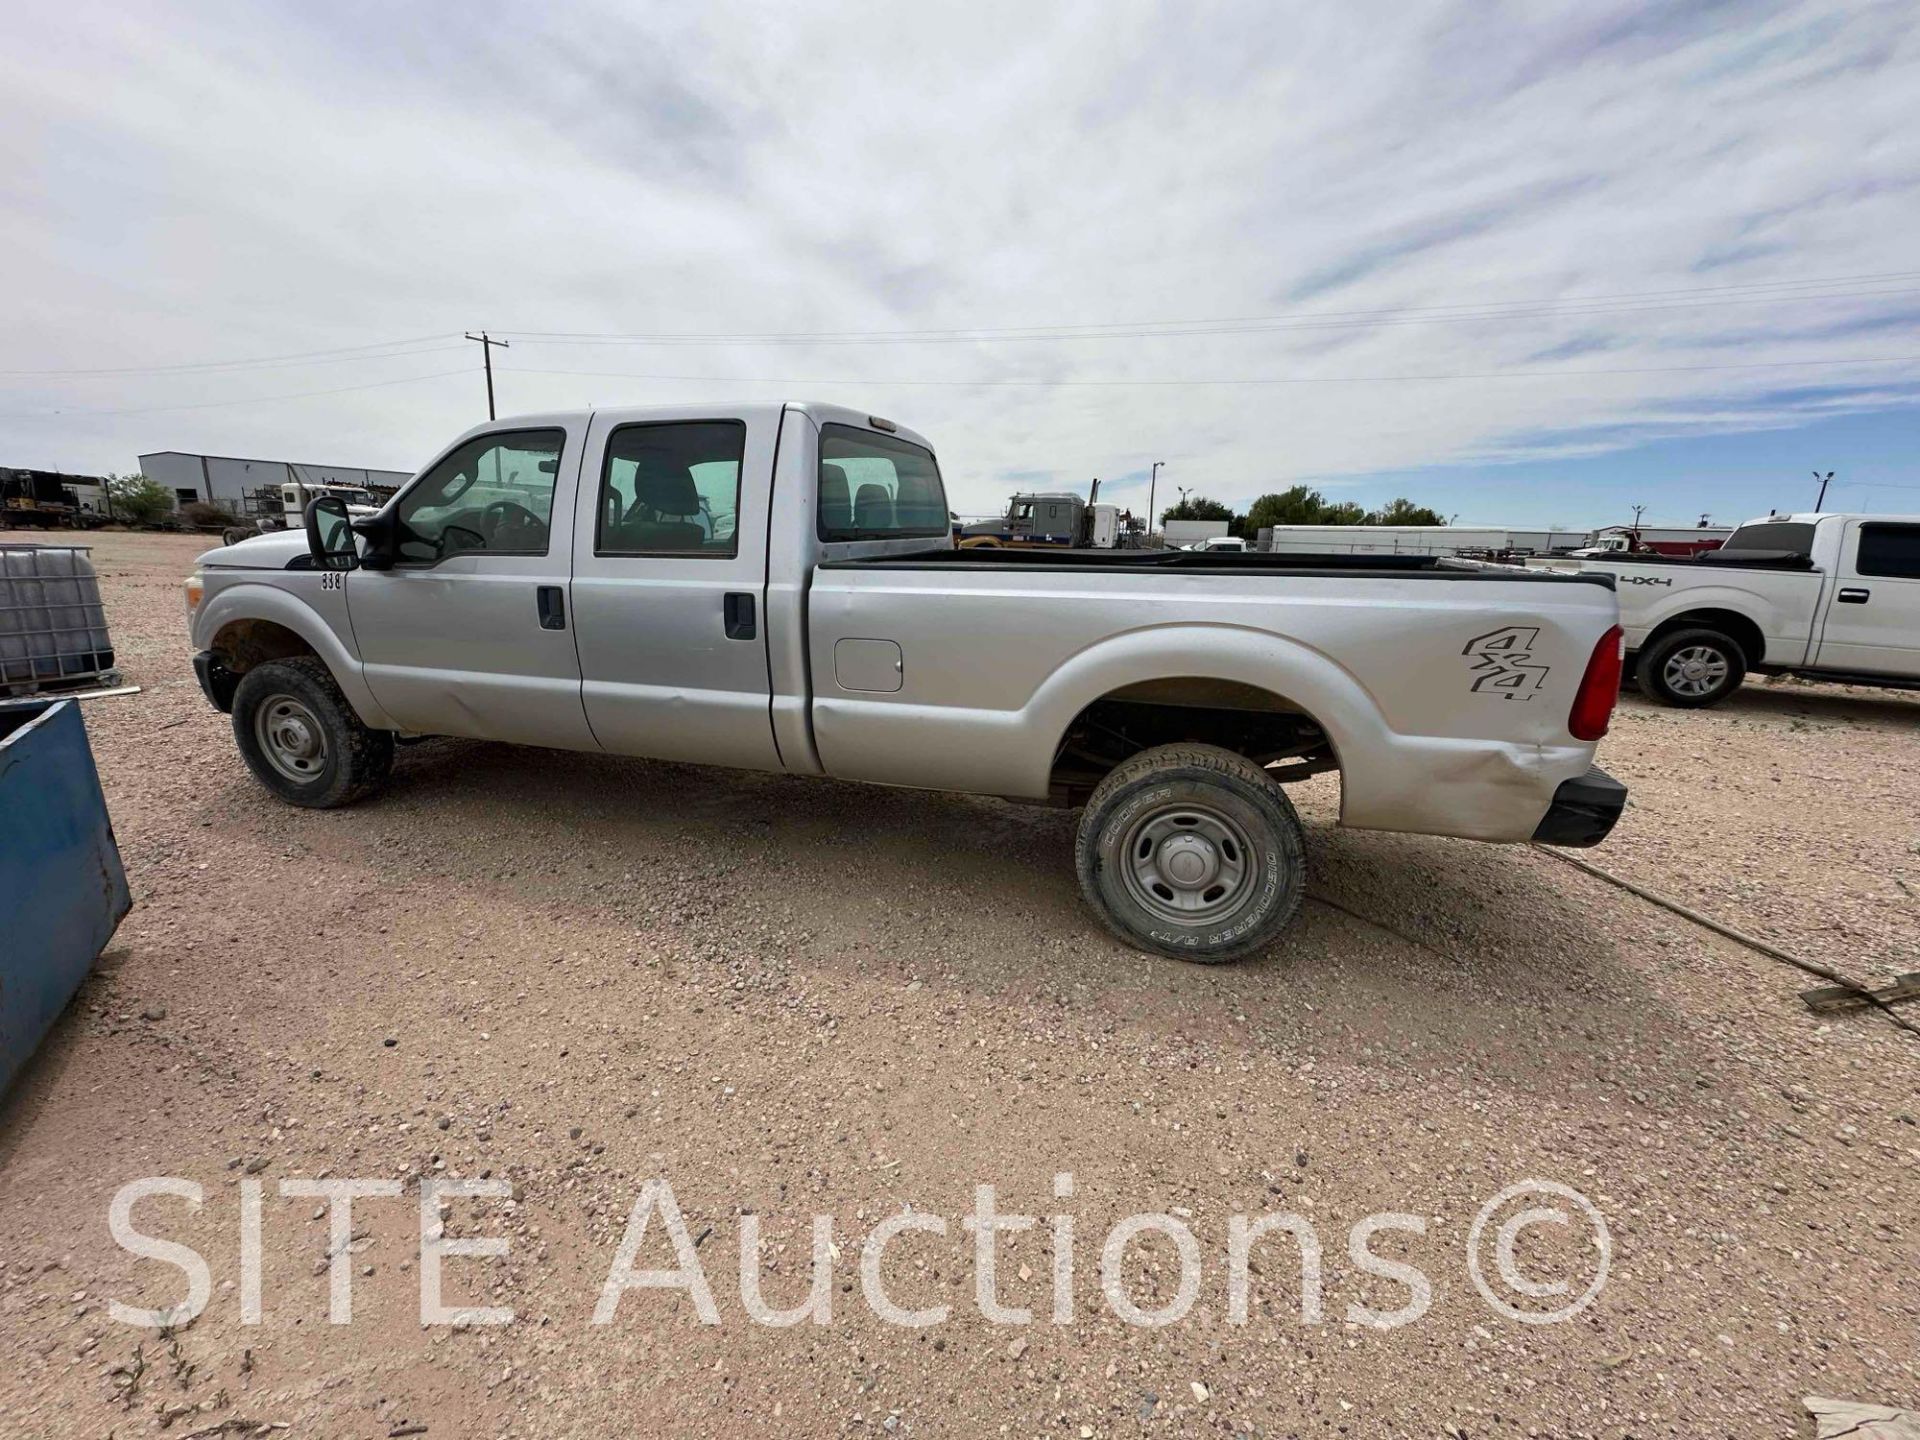 2011 Ford F350 SD Crew Cab Pickup Truck - Image 9 of 20